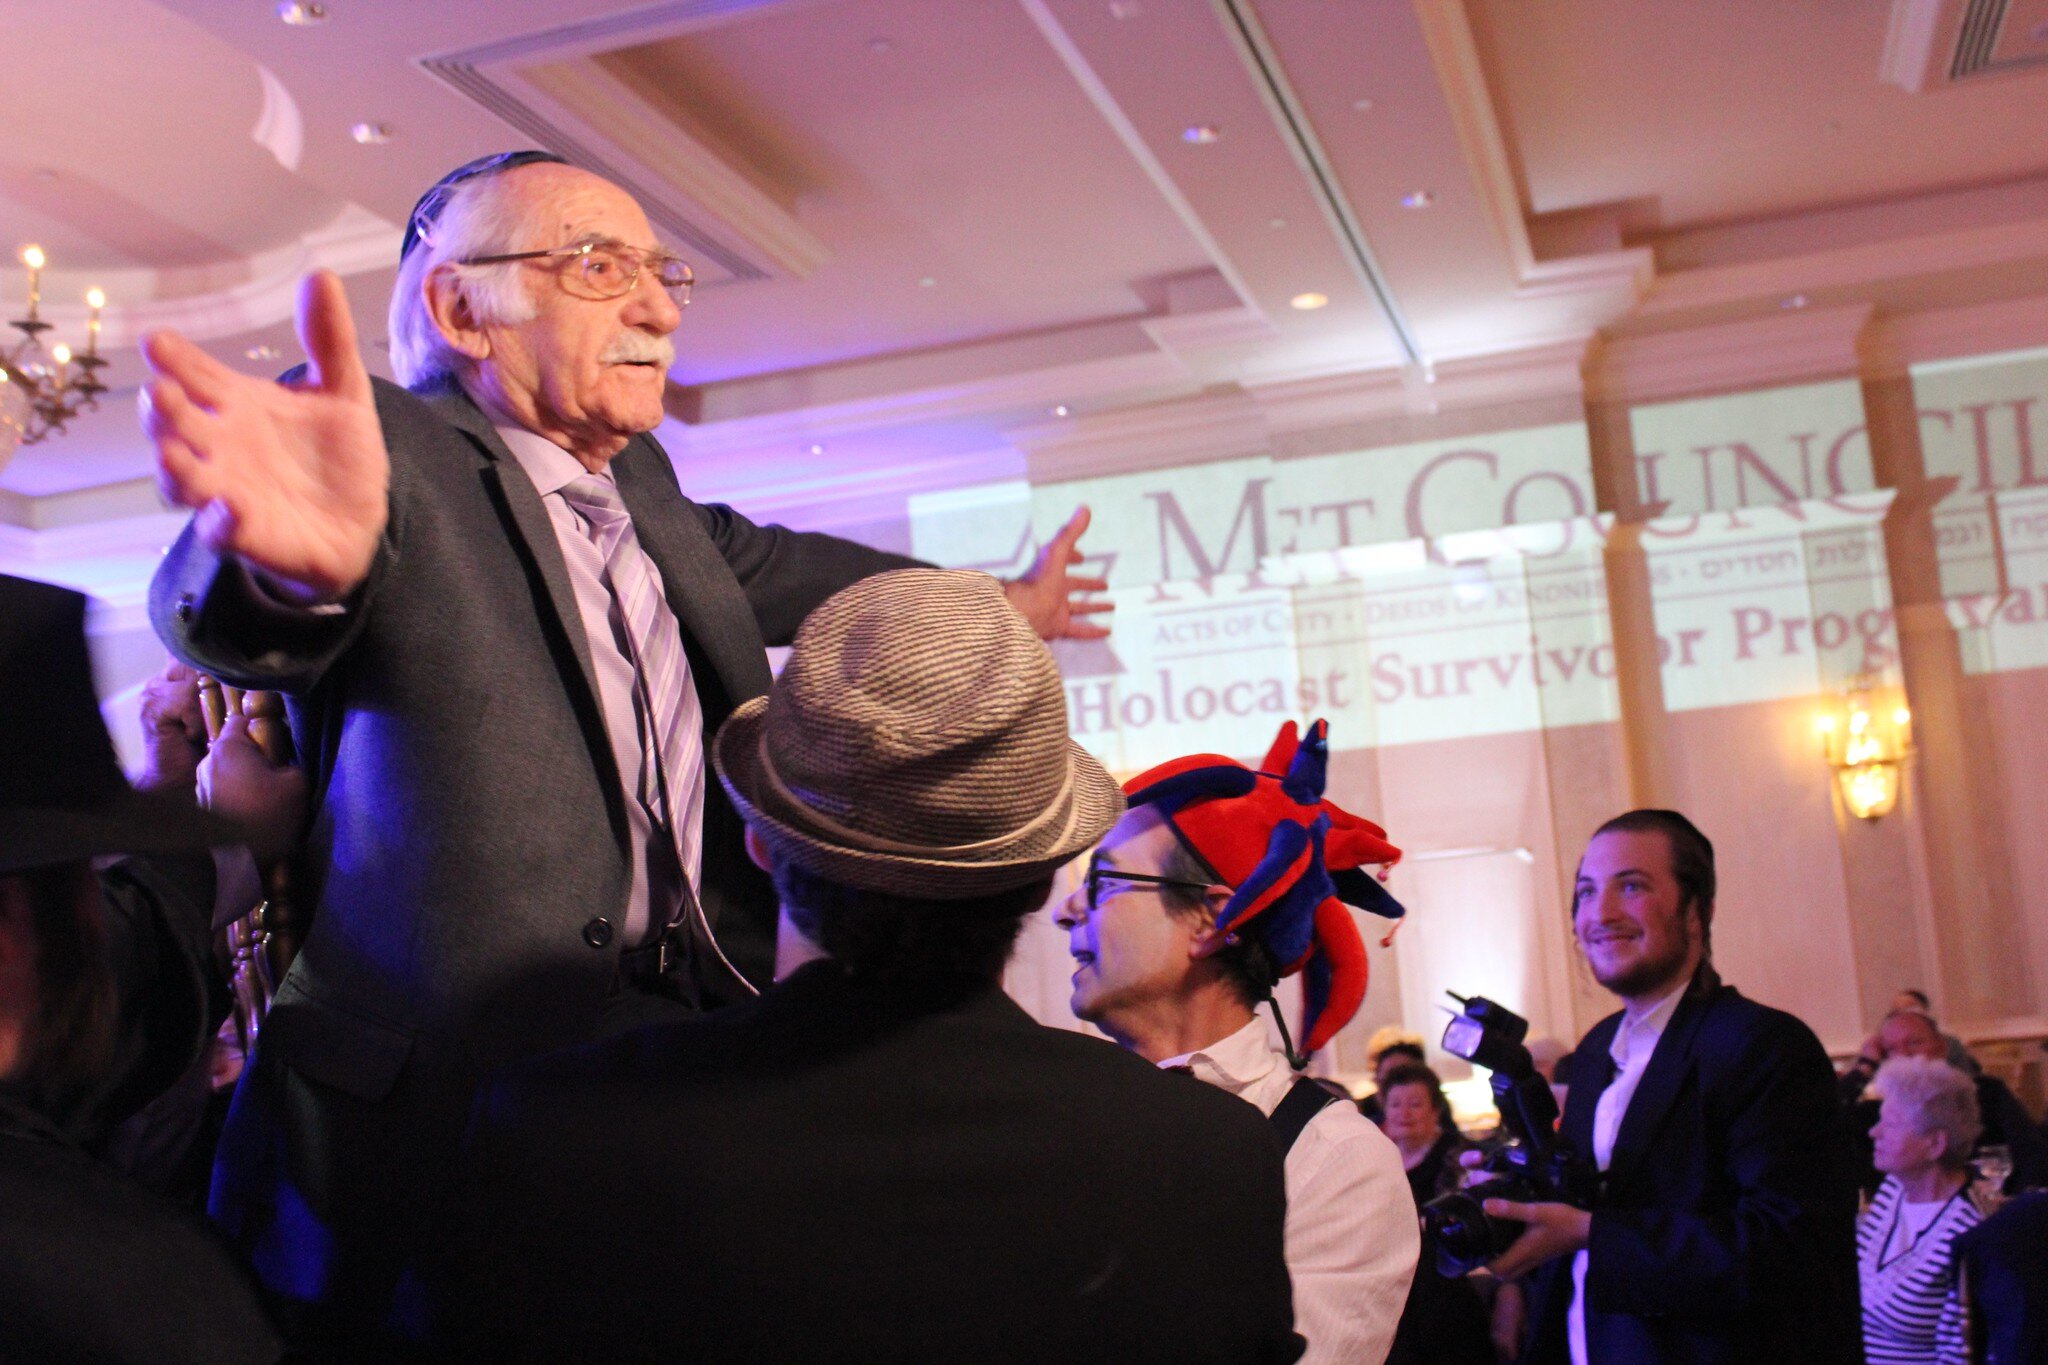 A holocaust survivor being held up on a chair at a party by a man with a tan fedora and a man with a red, felt jester’s hat.